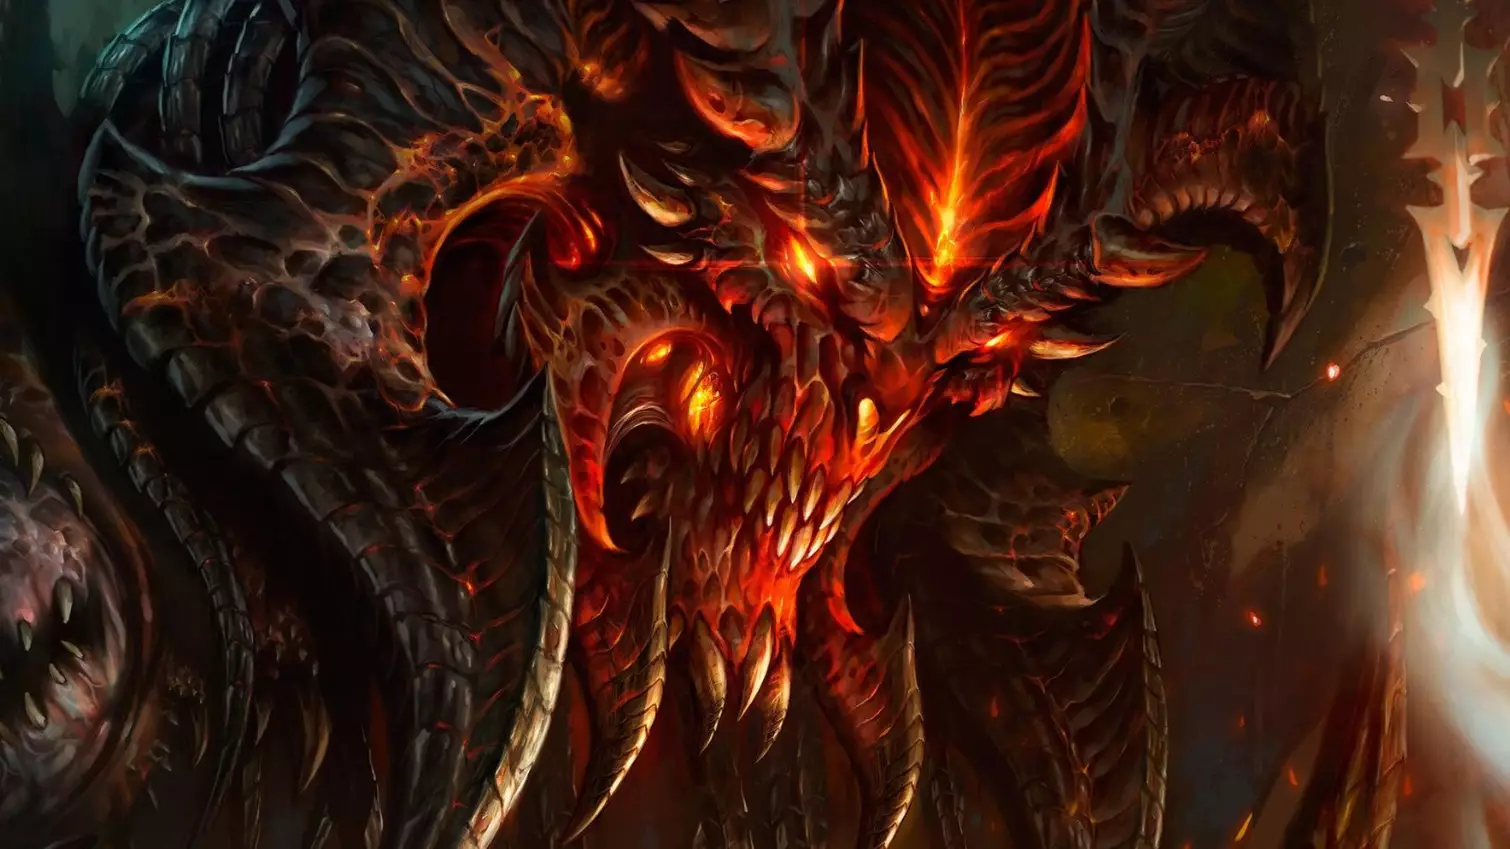 Job Listing Confirms New Diablo Game Is In The Works